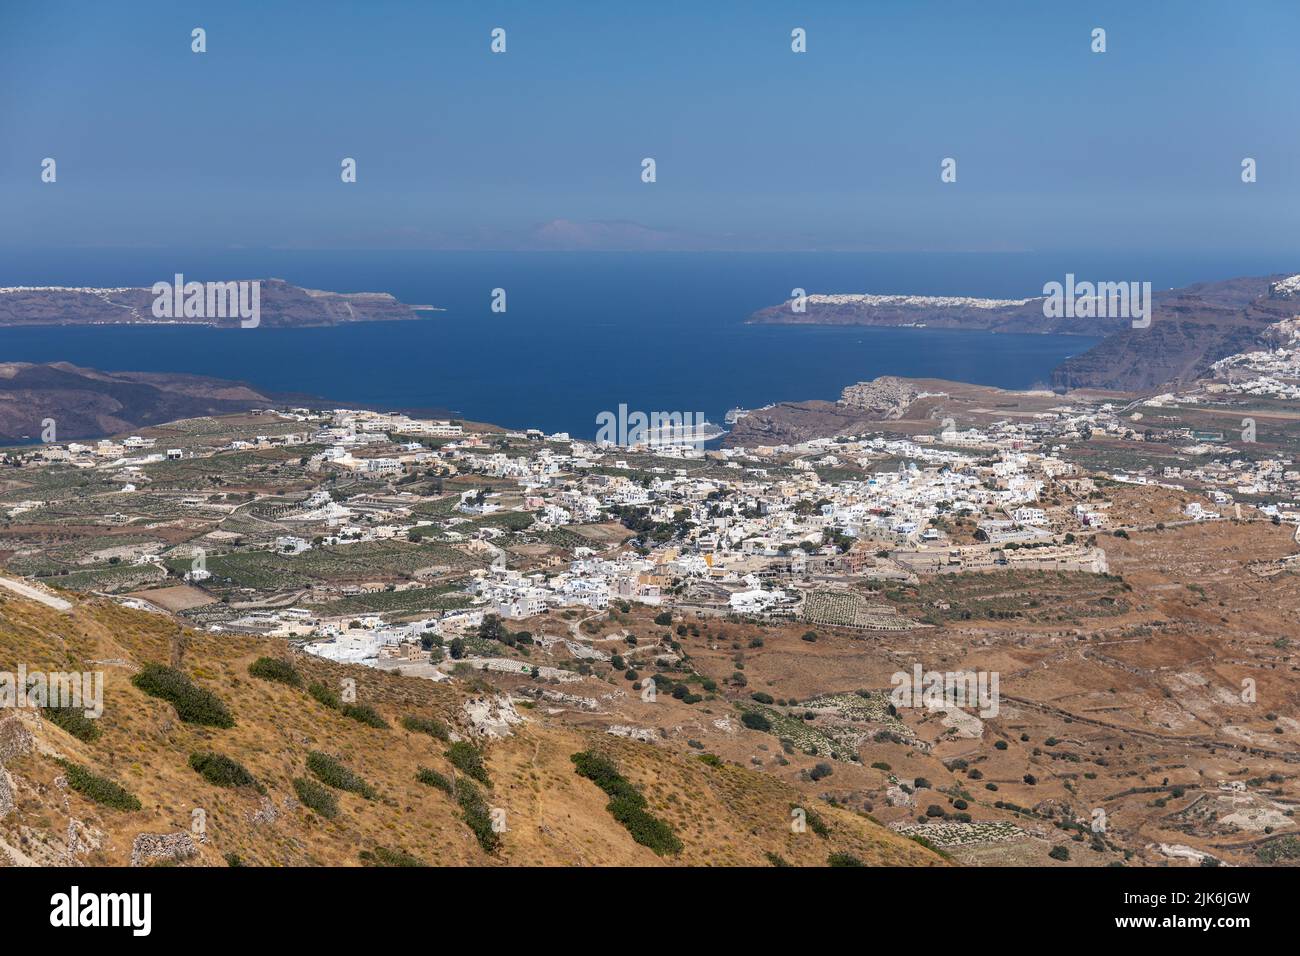 View from The Holy Orthodox Monastery of Prophet Elias on the summit of Mount Profitis Ilias of Fira town and Thira volcanic landscape, Greece, EU Stock Photo